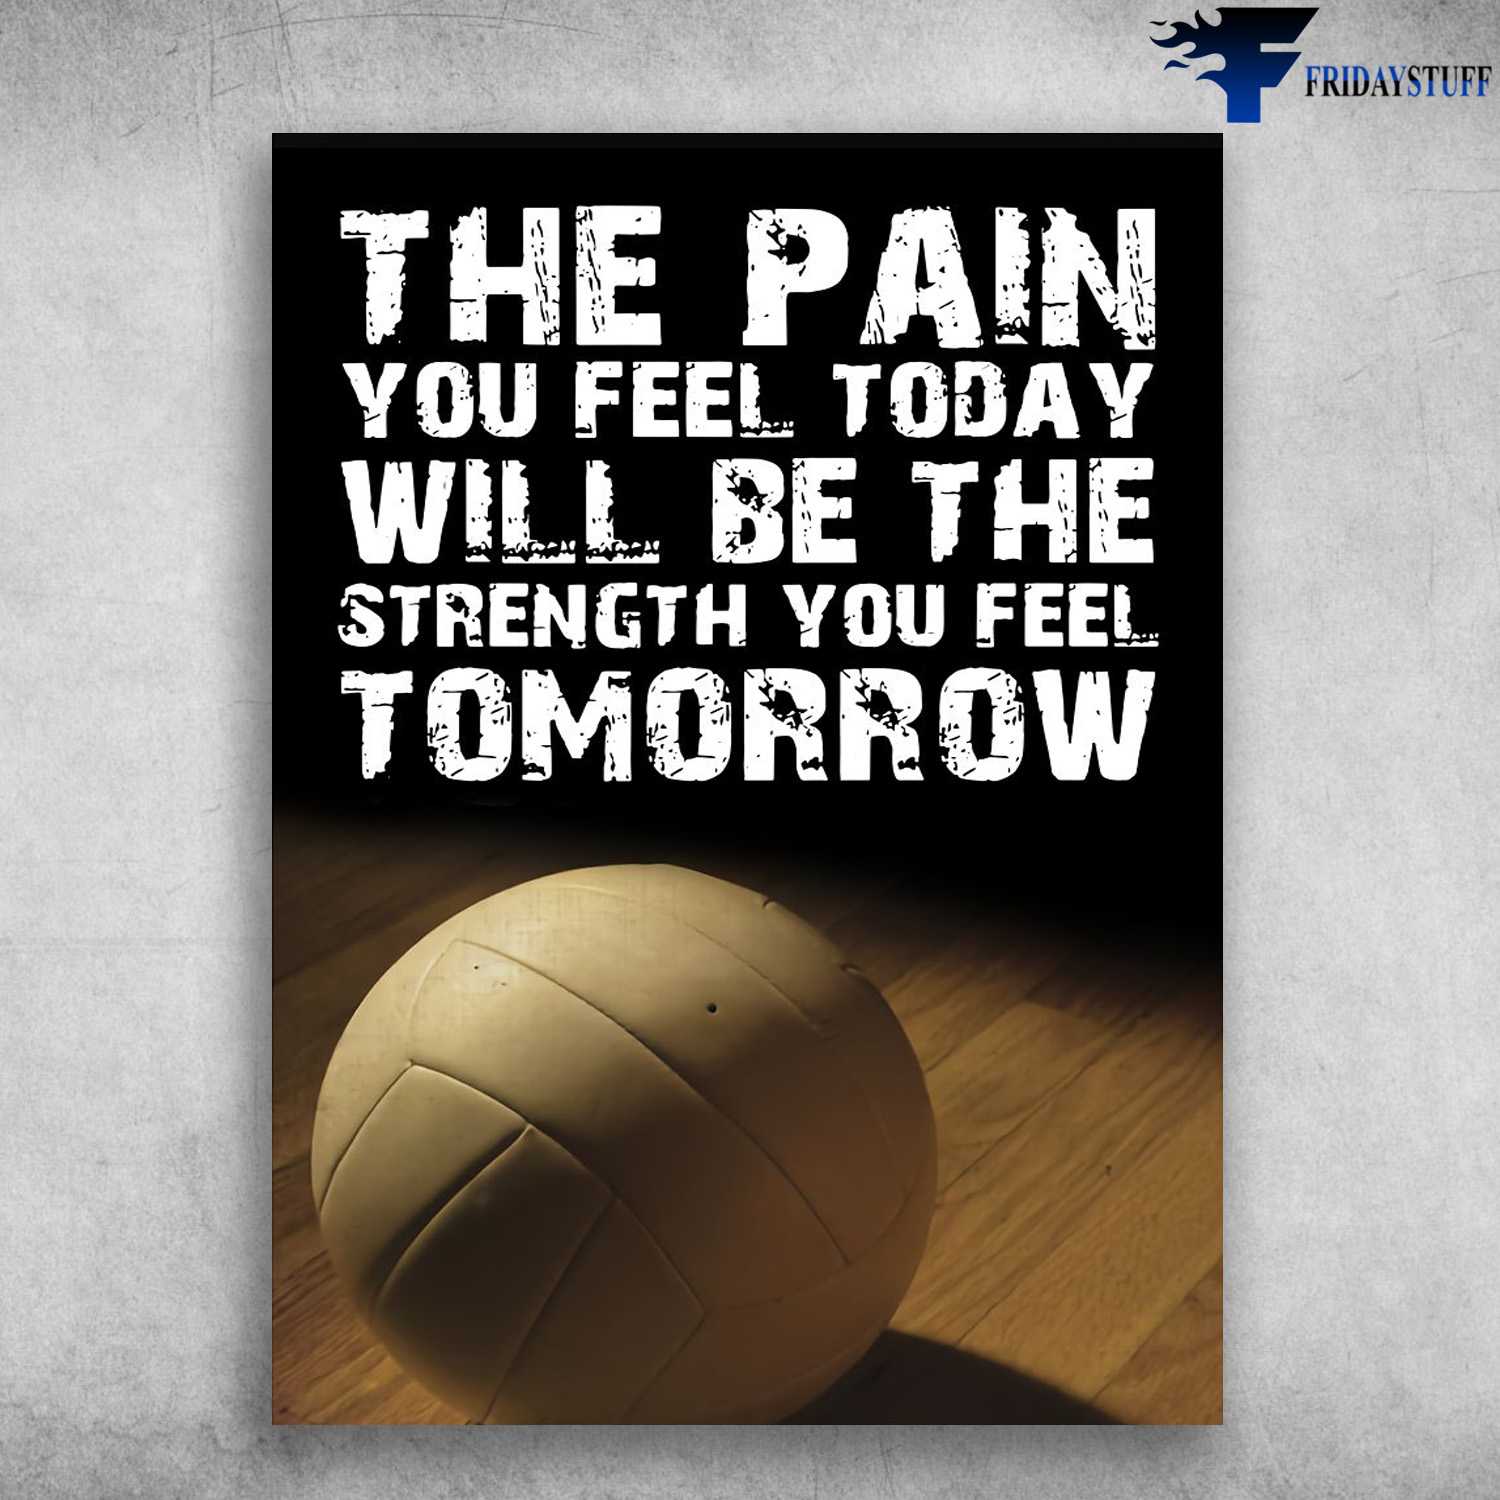 Volleyball Poster, The Pain You Feel Today, Will Be The Strength You Feel Tomorow